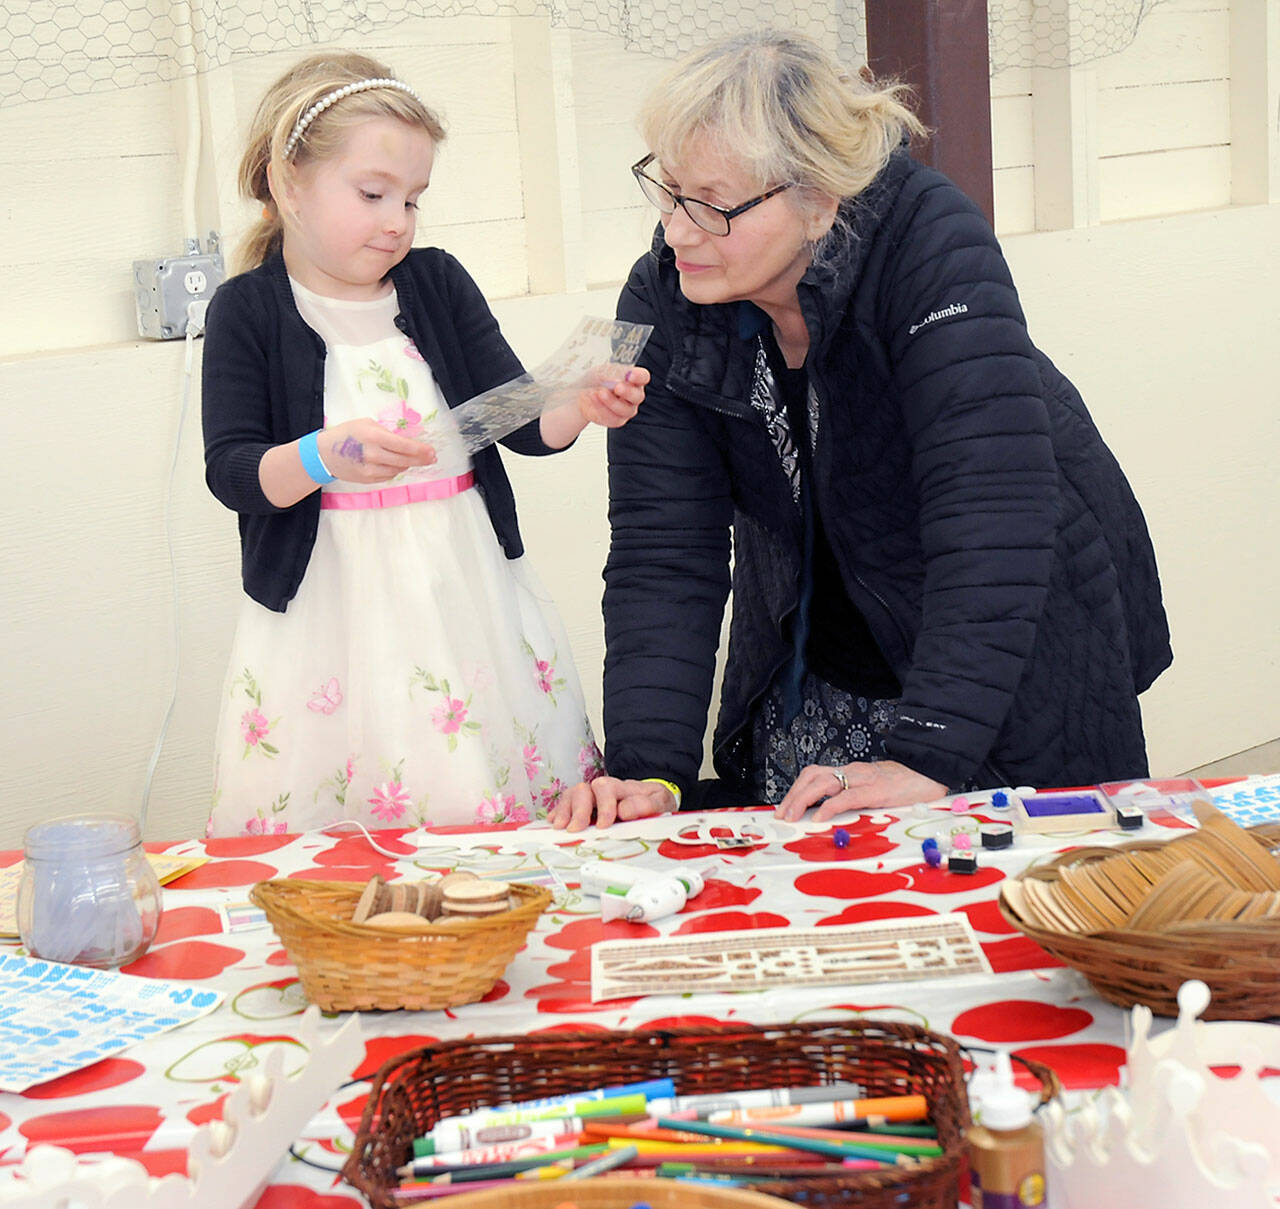 Ida Shantz, 5, of Port Angeles looks over a sheet of stenciled letters with her grandmother, Patricia Kessler of Woodburn, Ore., at a cardboard crown craft table during Saturday’s Barn Dance at the Clallam County Fairgrounds to benefit the Five Acre School north of Sequim. The dance also included food, entertainment, children’s activities and a silent auction. (Keith Thorpe/Peninsula Daily News)